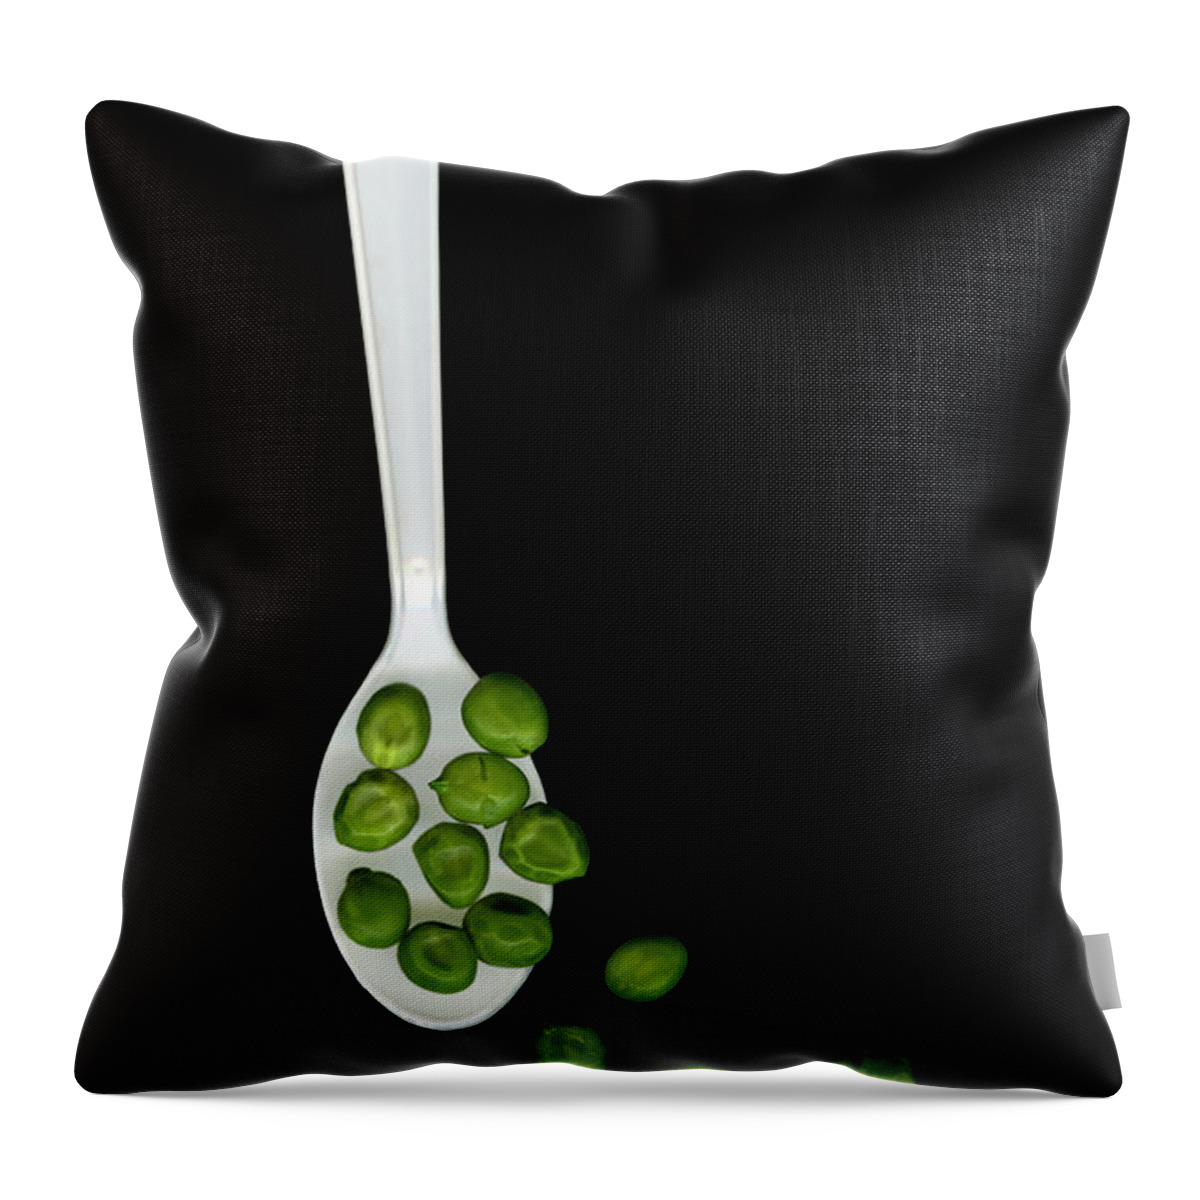 Black Background Throw Pillow featuring the photograph White Plastic Spoon And Green Peas by Thomas J Peterson